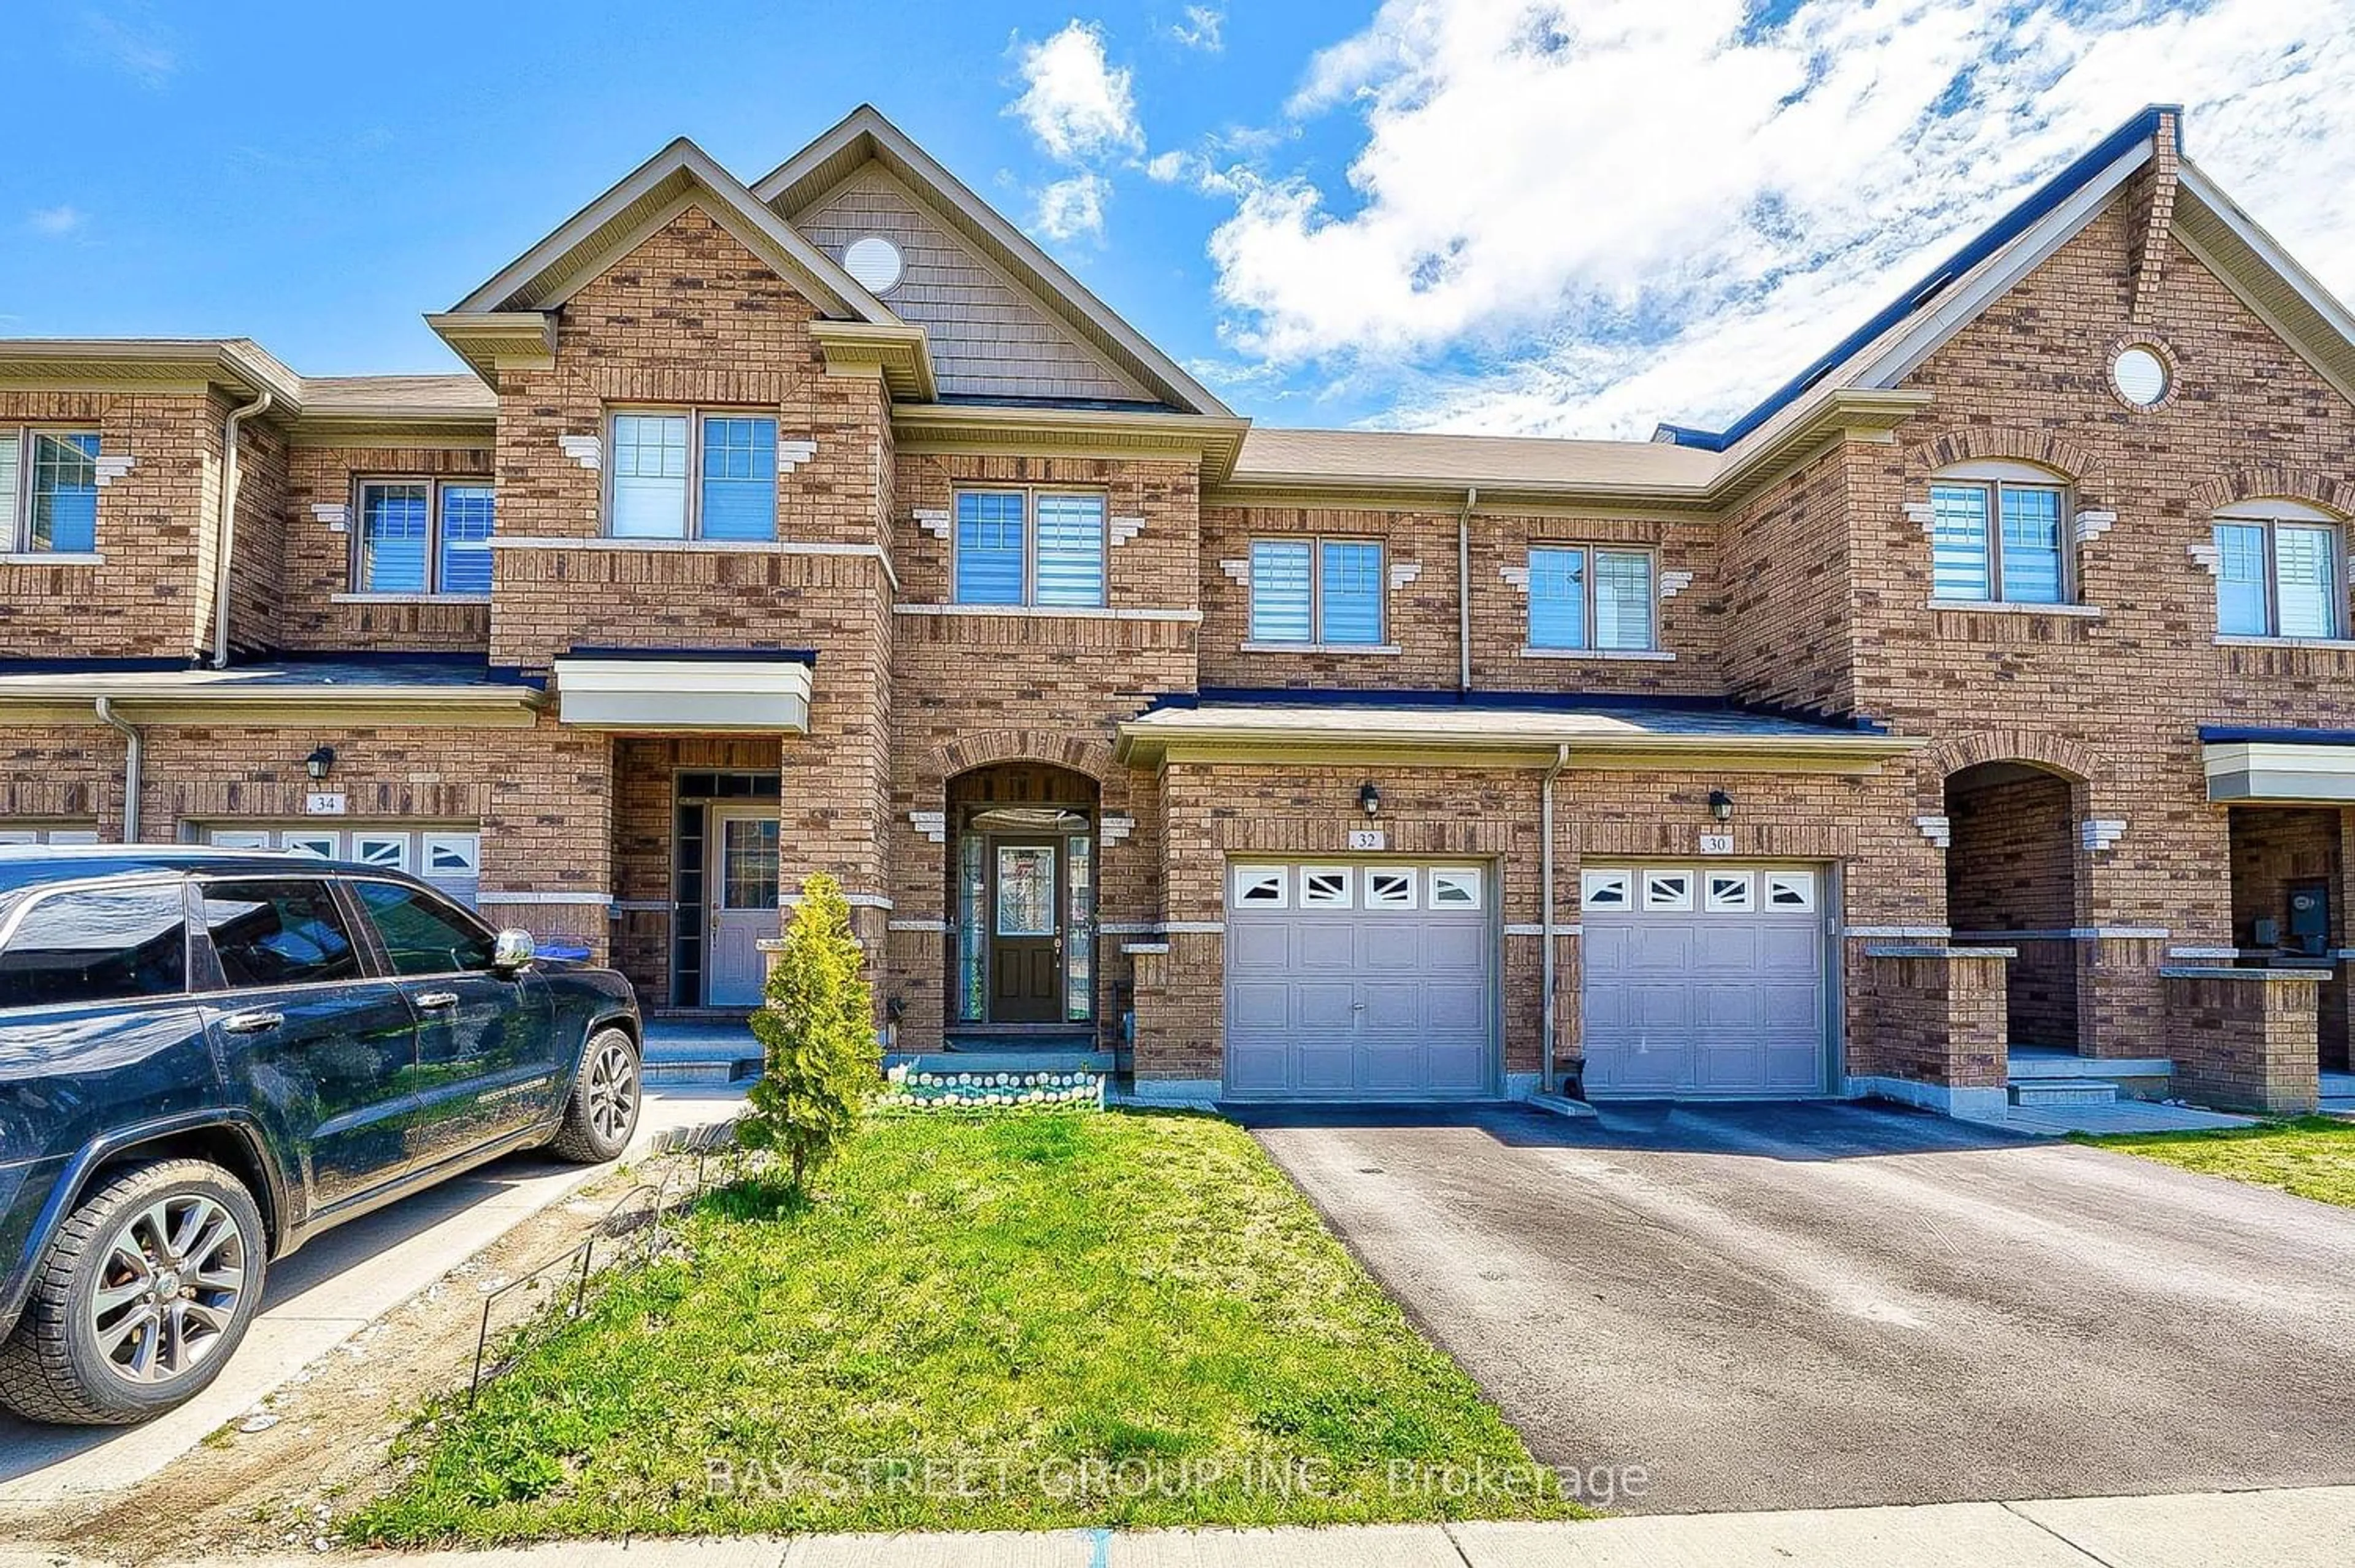 Home with brick exterior material for 32 Davenfield Circ, Brampton Ontario L5P 3R6